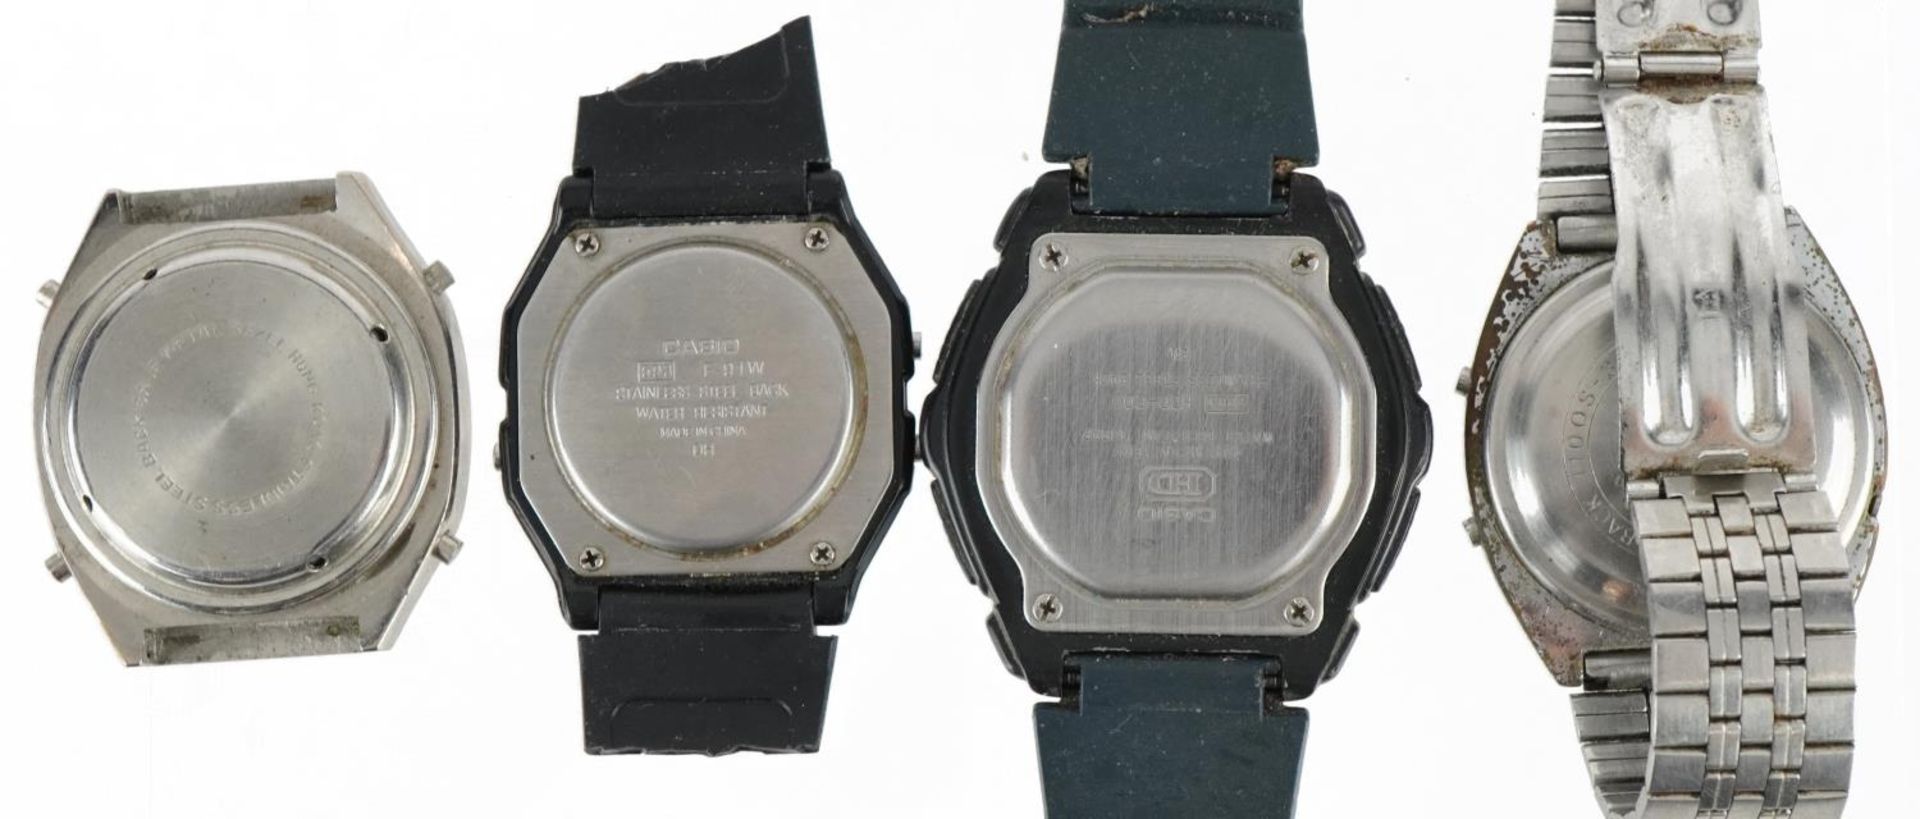 Four vintage gentlemen's electronic wristwatches including Casio F-91W, Casio alarm chronograph - Image 3 of 4